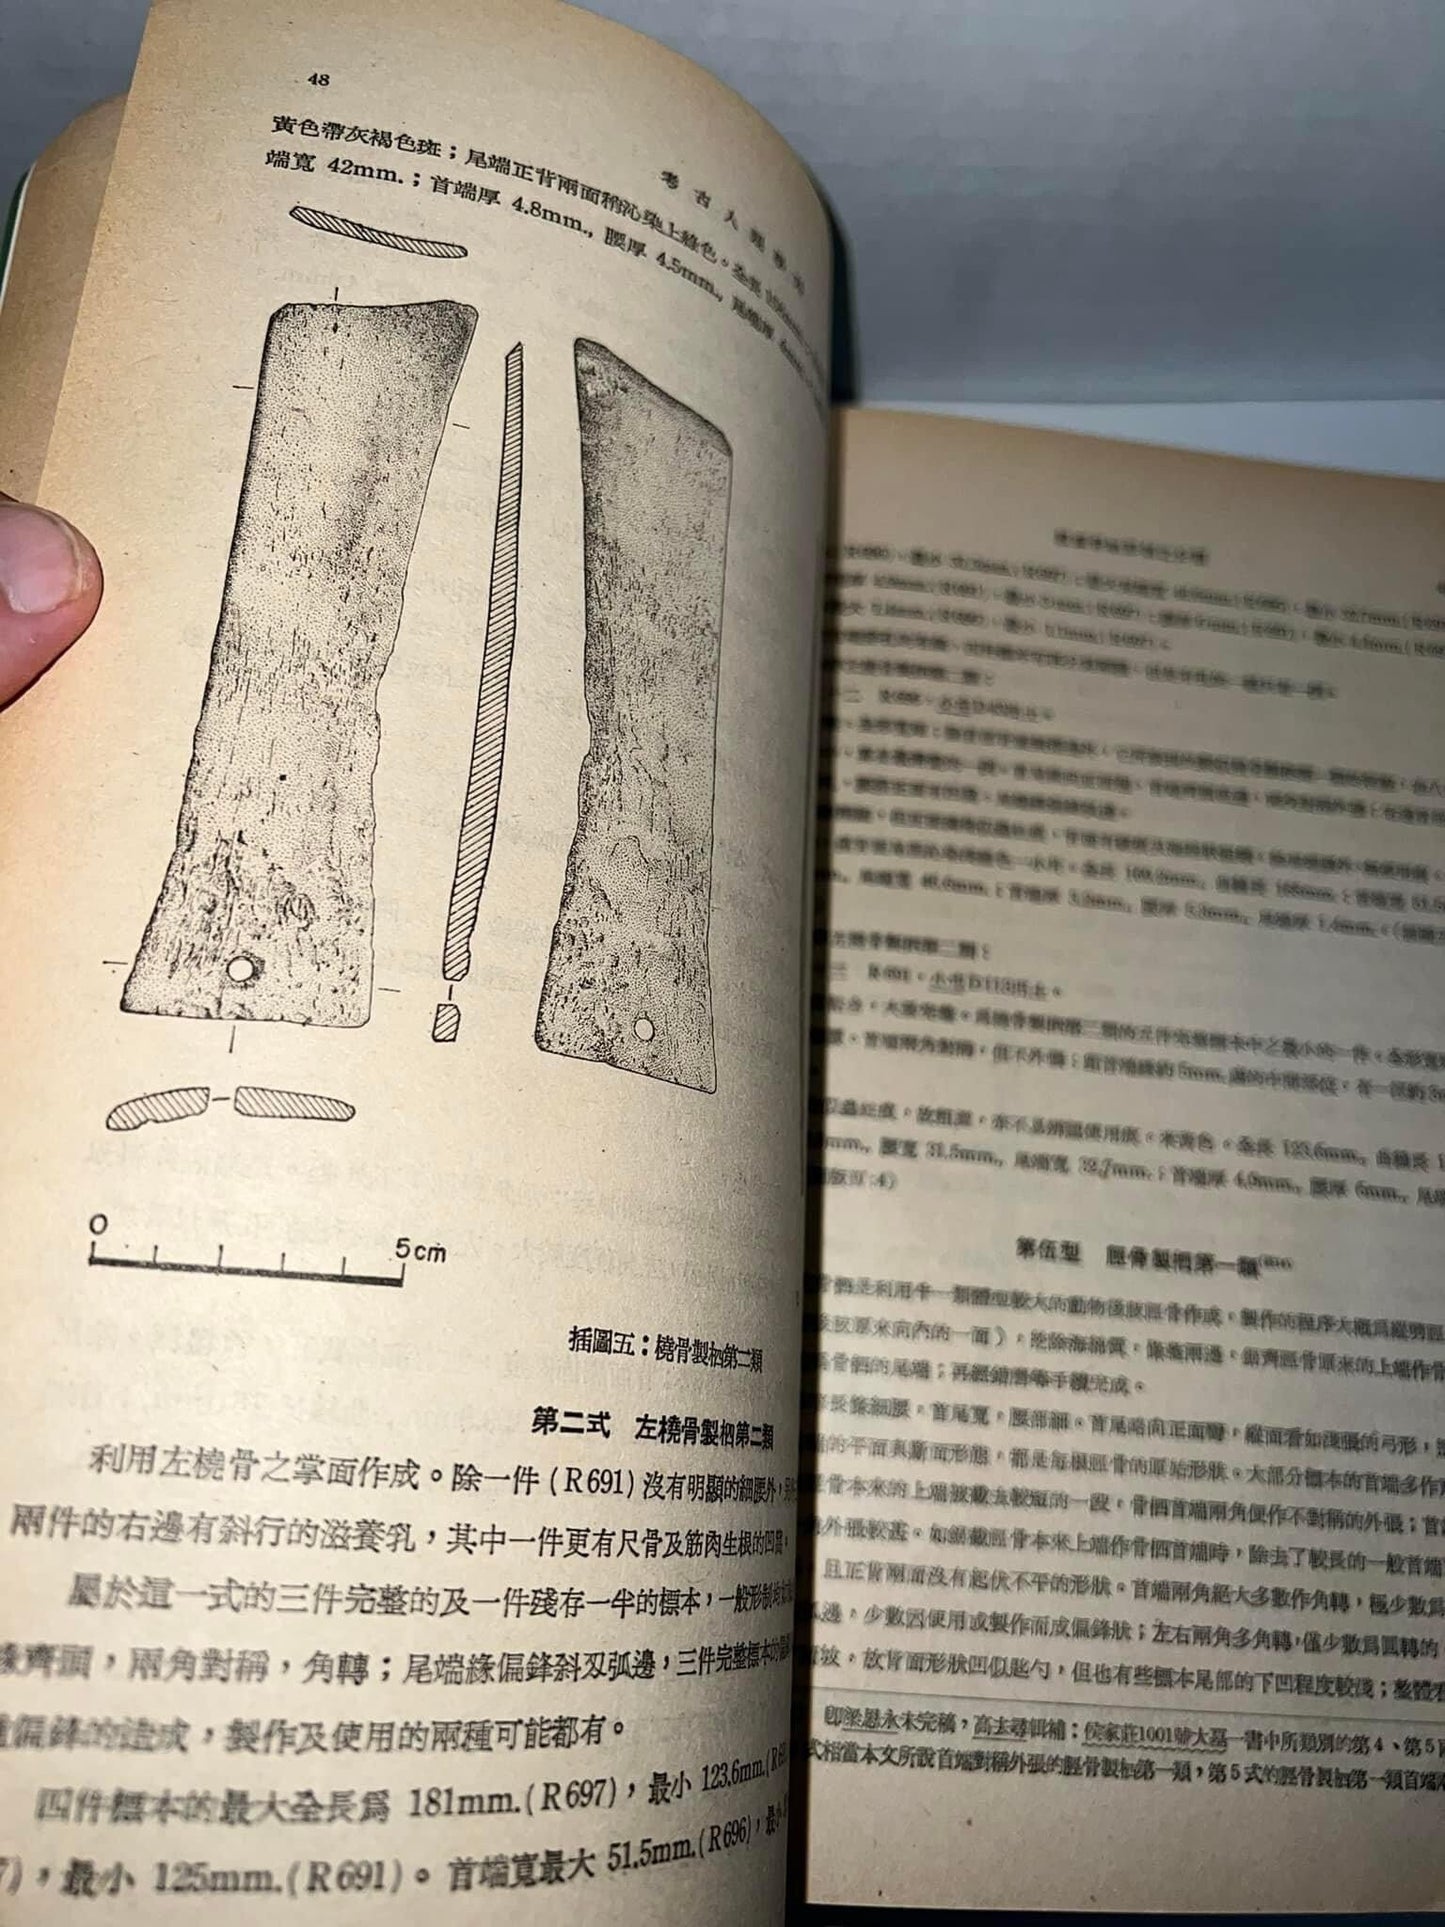 Vintage scarce Taiwanese archaeology -1965 bulletin of the department of archaeology and anthropology